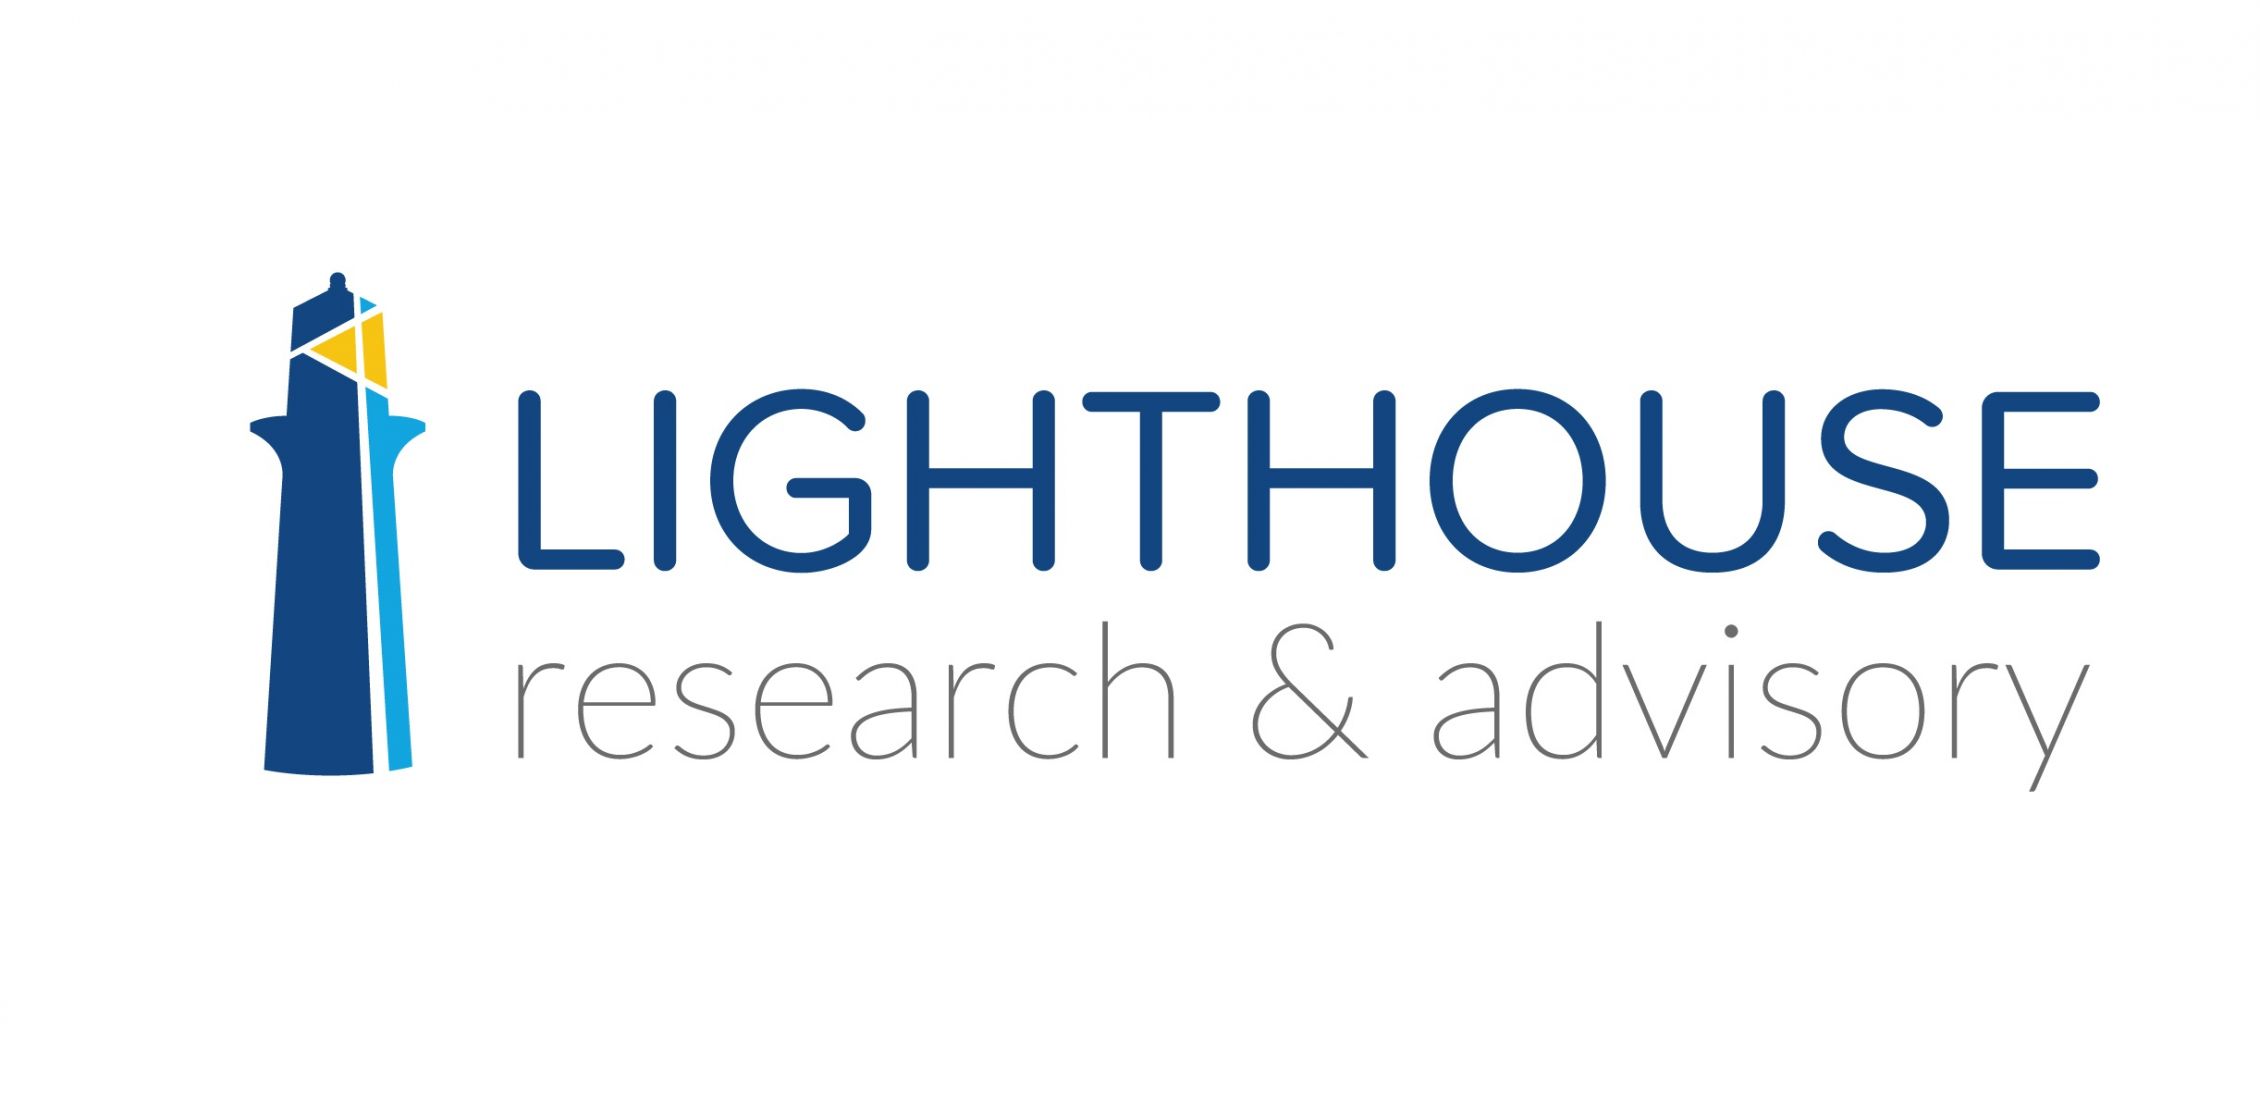 Lighthouse Research & Advisory